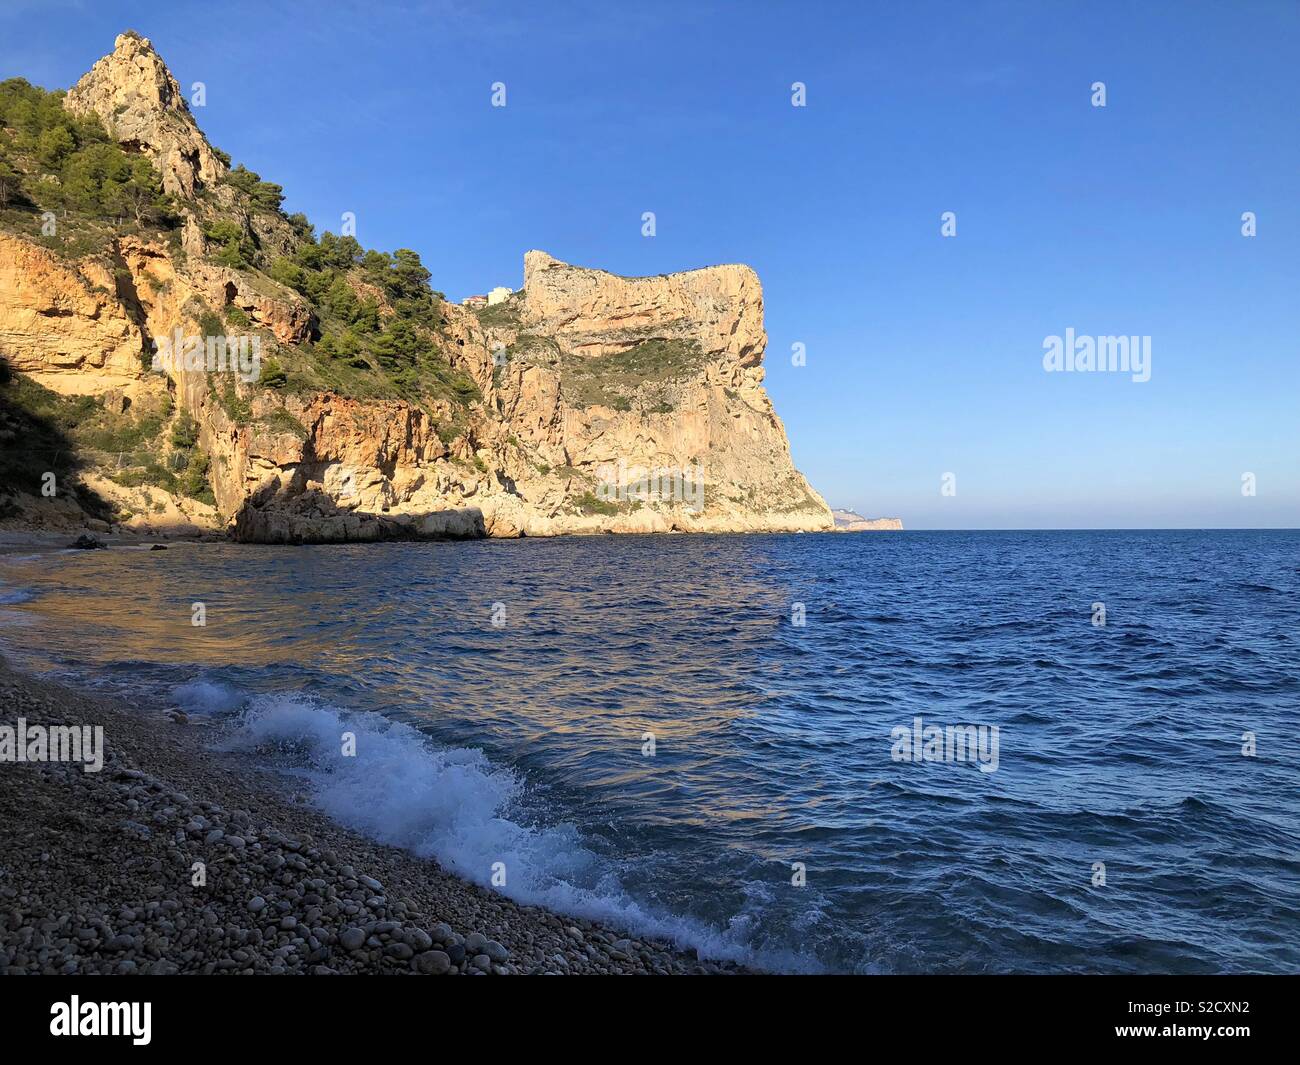 Late afternoon view over pebble beach to dramatic golden sea cliffs, Cala del Moraig, Benitachell, Costa Blanca, Spain Stock Photo